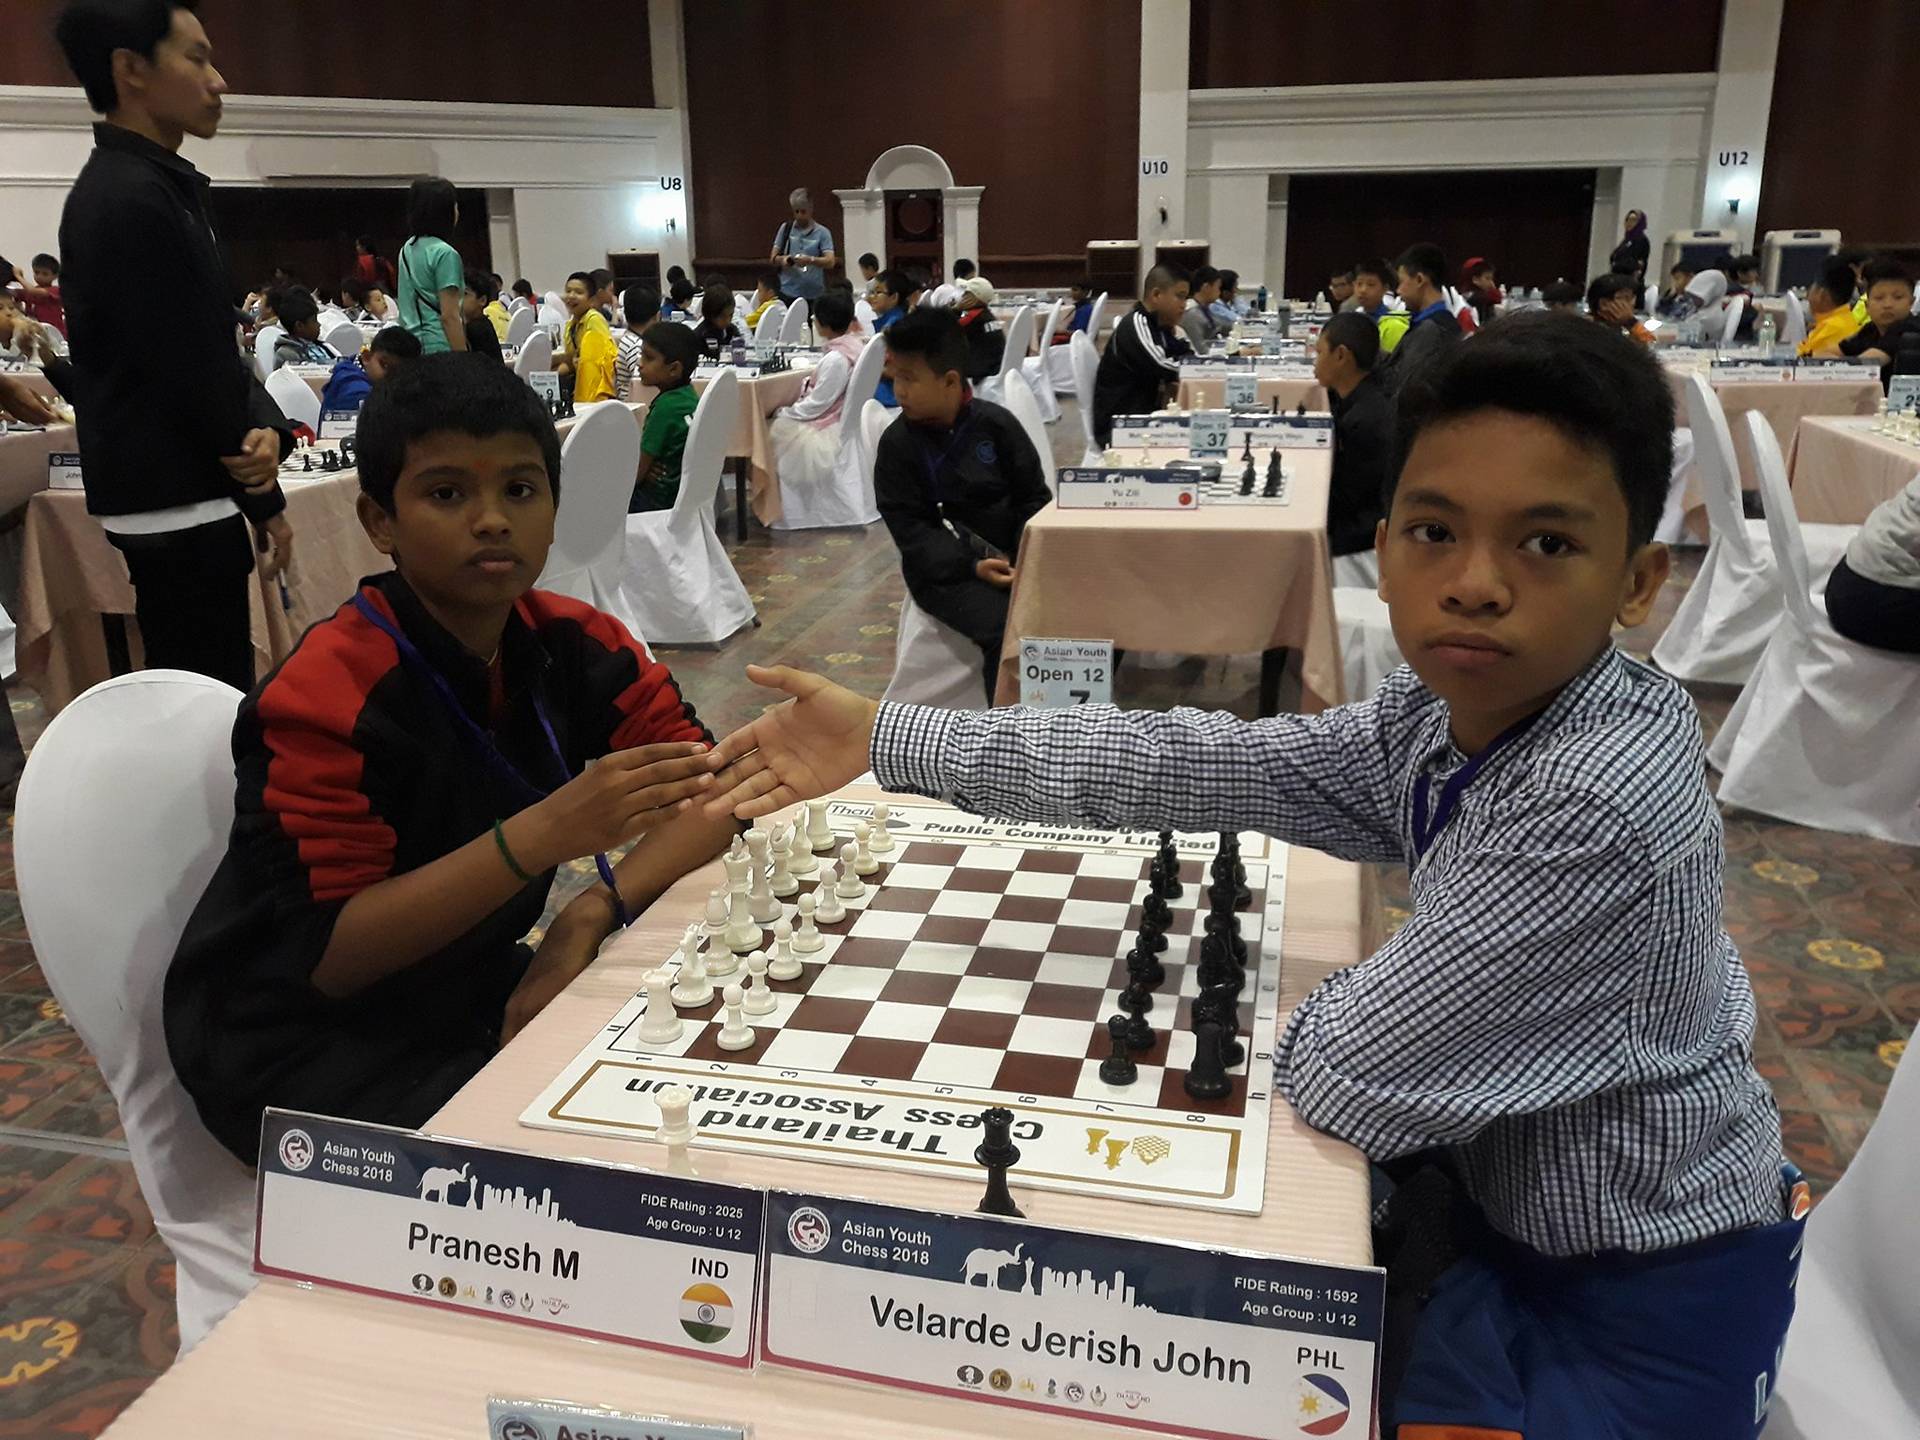  Pranesh M of India (left) versus Jerish John Velarde of Lapu-Lapu City, Cebu, Philippines (right) during the Round 4 of the Asian Youth Chess Championships Standard event on Wednesday at the Lotus Pang Suan Kaew Hotel in Chiang Mai, Thailand. DAVAO BET FM JOHN MARVIN MICIANO STILL ON TOP